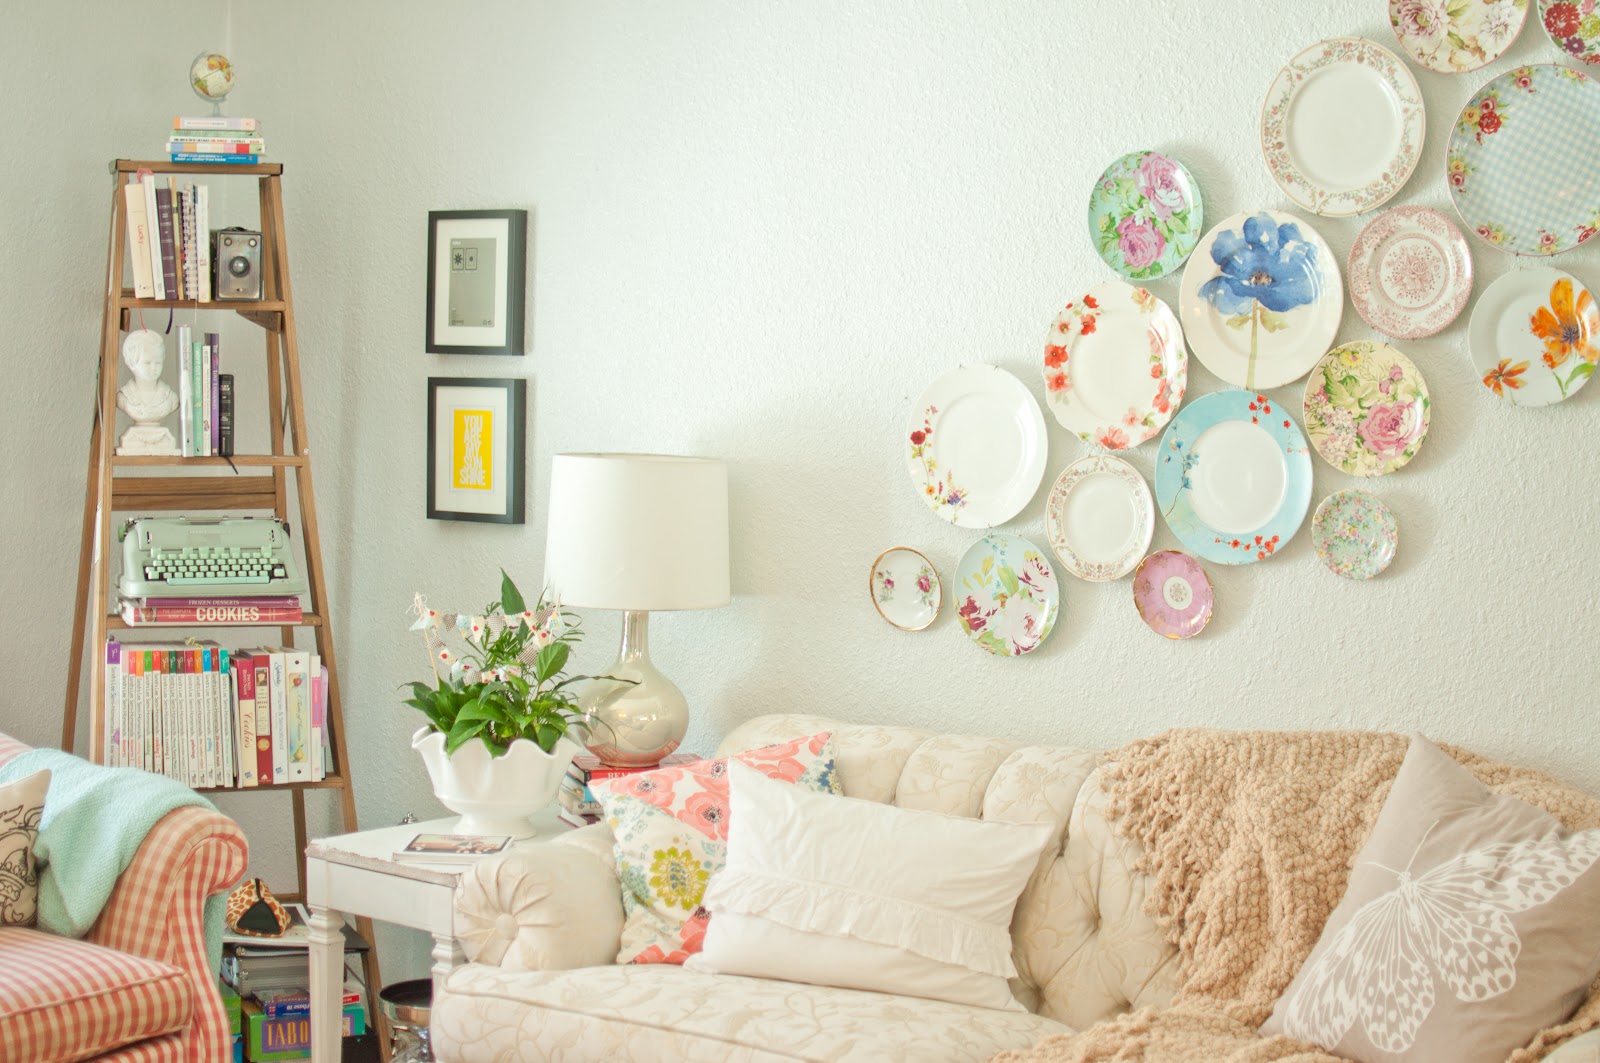 Decorating With Plates In The Bedroom